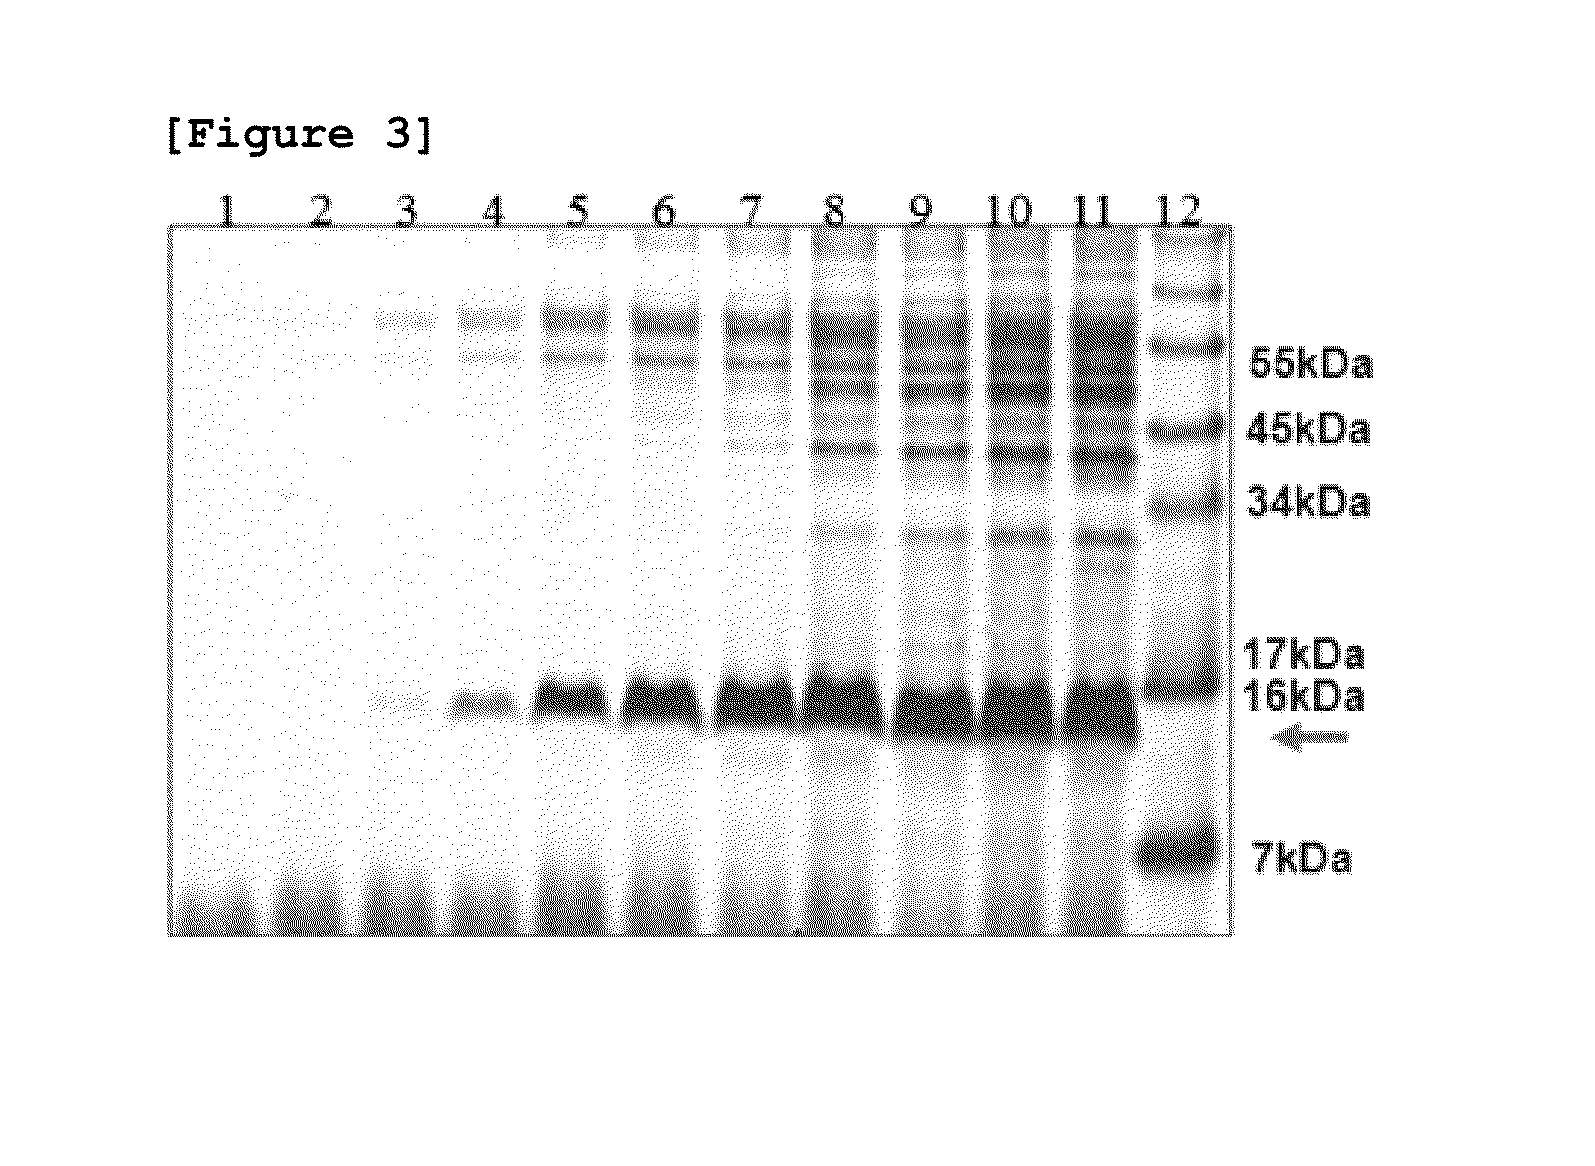 Method for producing human epidermal growth factor in large volume from yeast